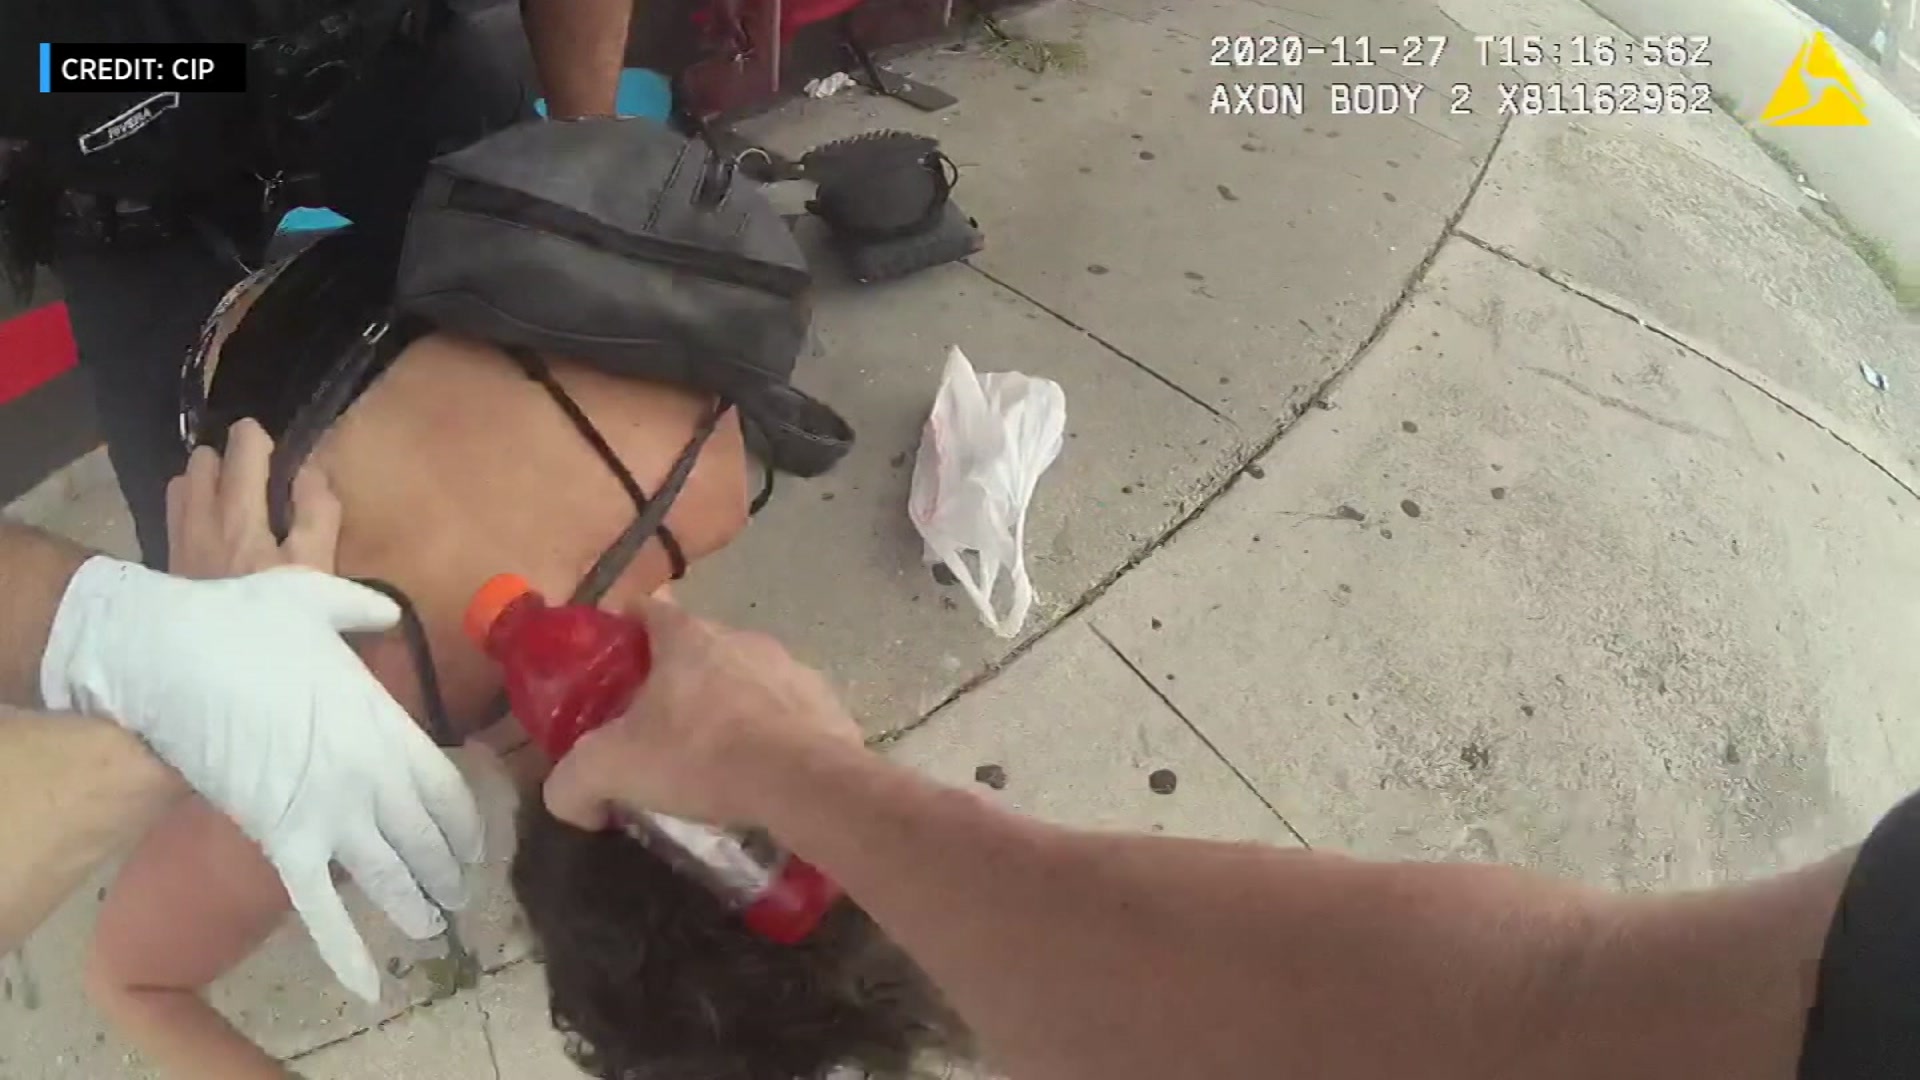 Miami Police Officer Resigns Following Internal Affairs Investigation Over Rough Arrest